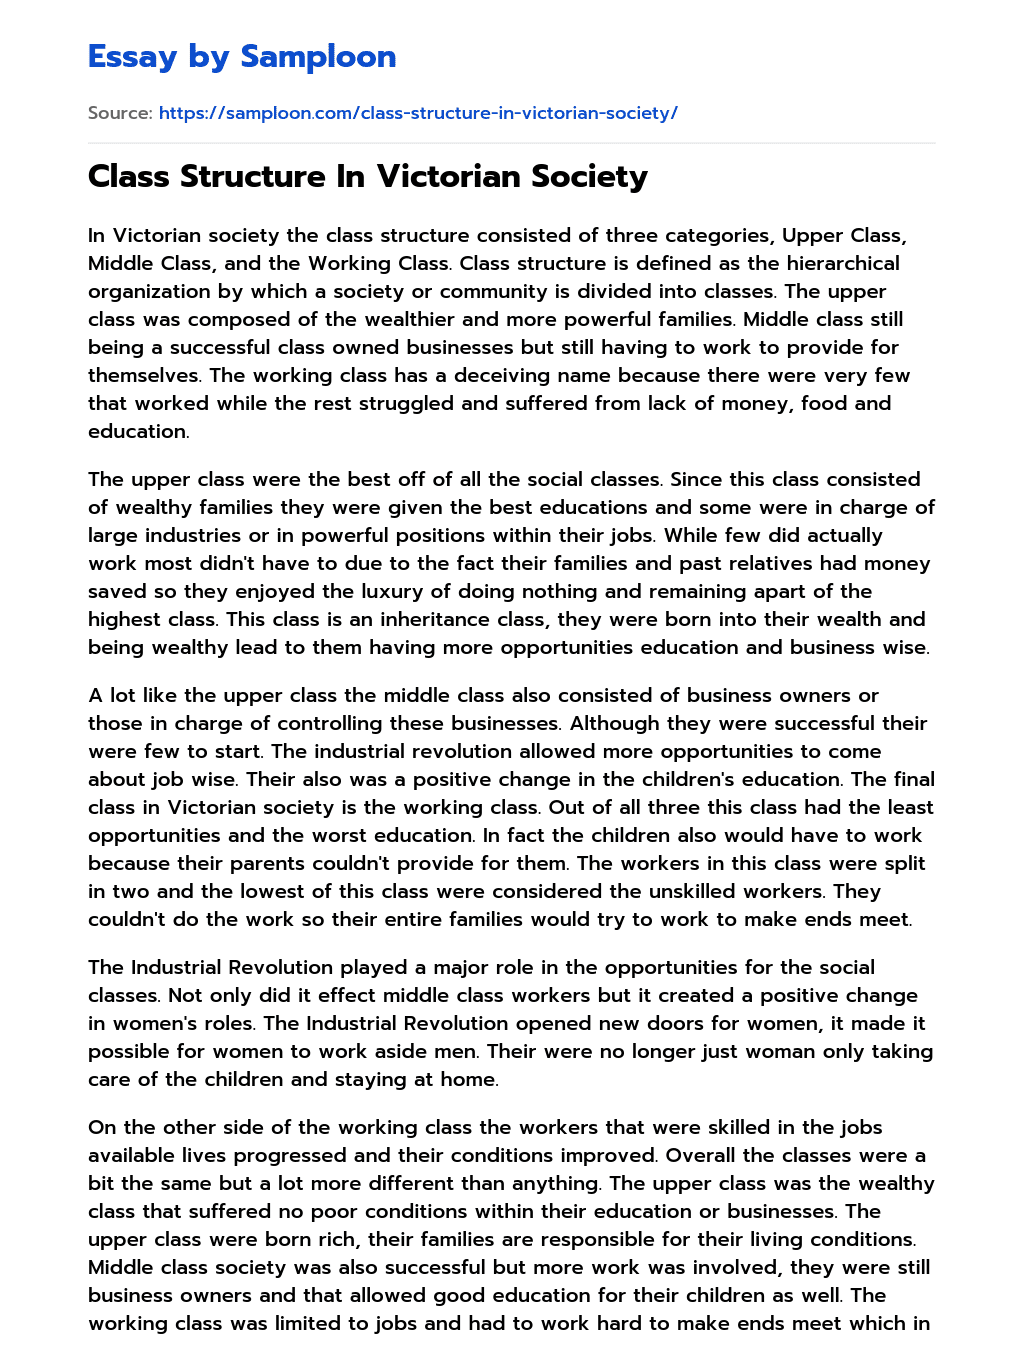 Class Structure In Victorian Society essay